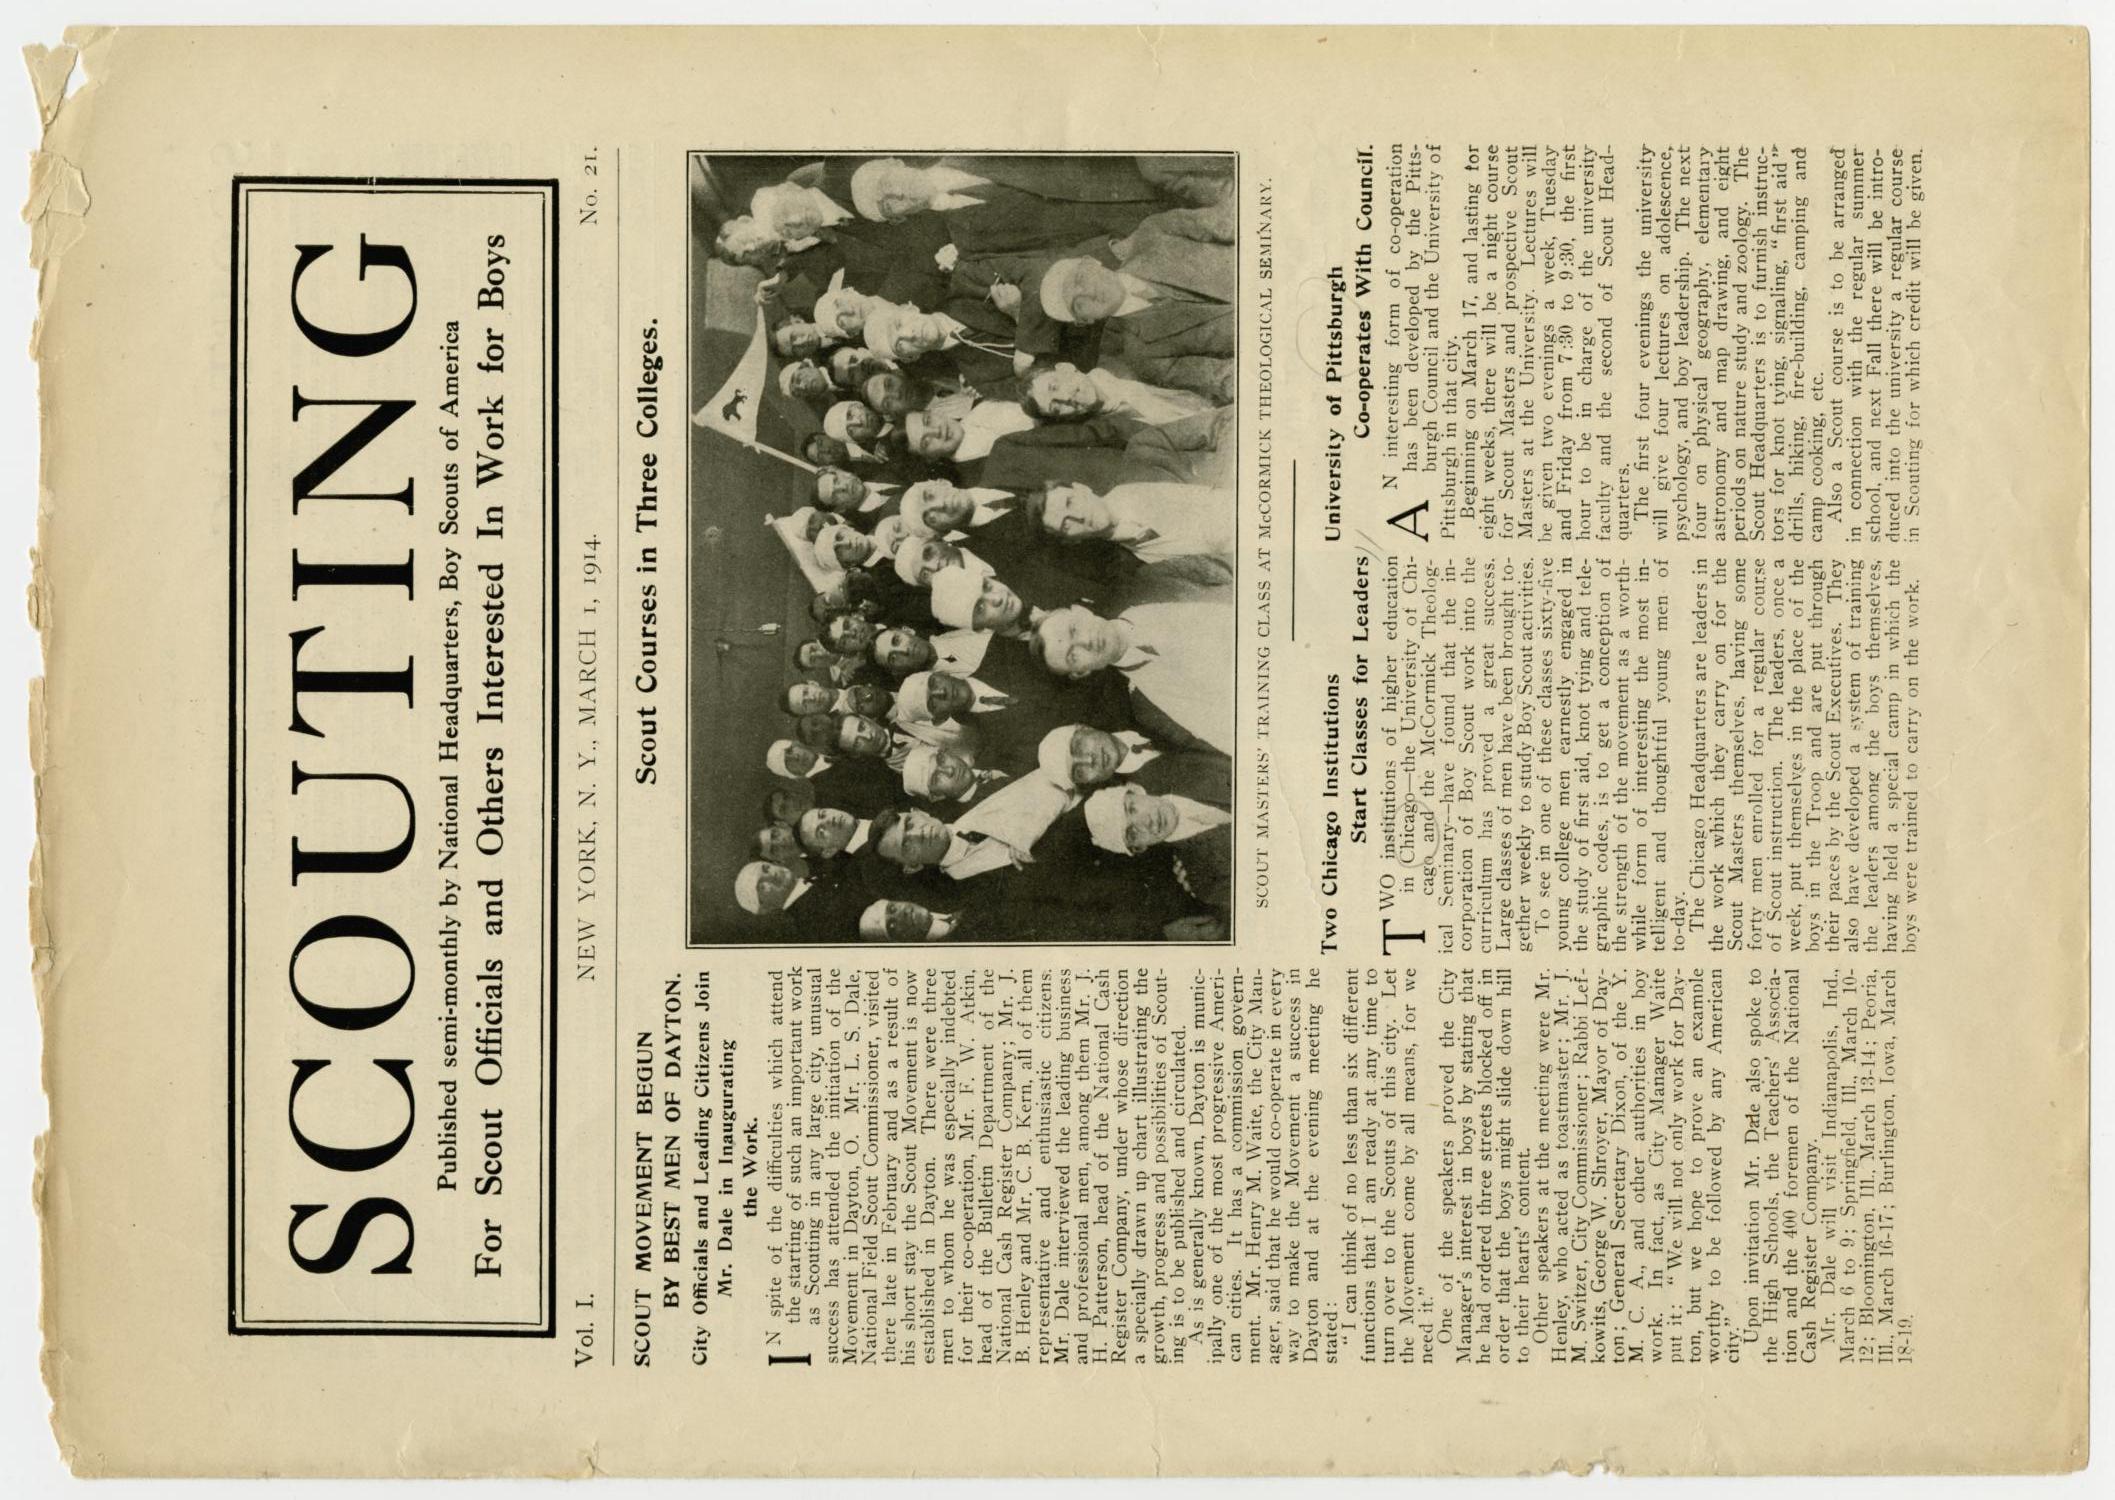 Scouting, Volume 1, Number 21, March 1, 1914
                                                
                                                    1
                                                